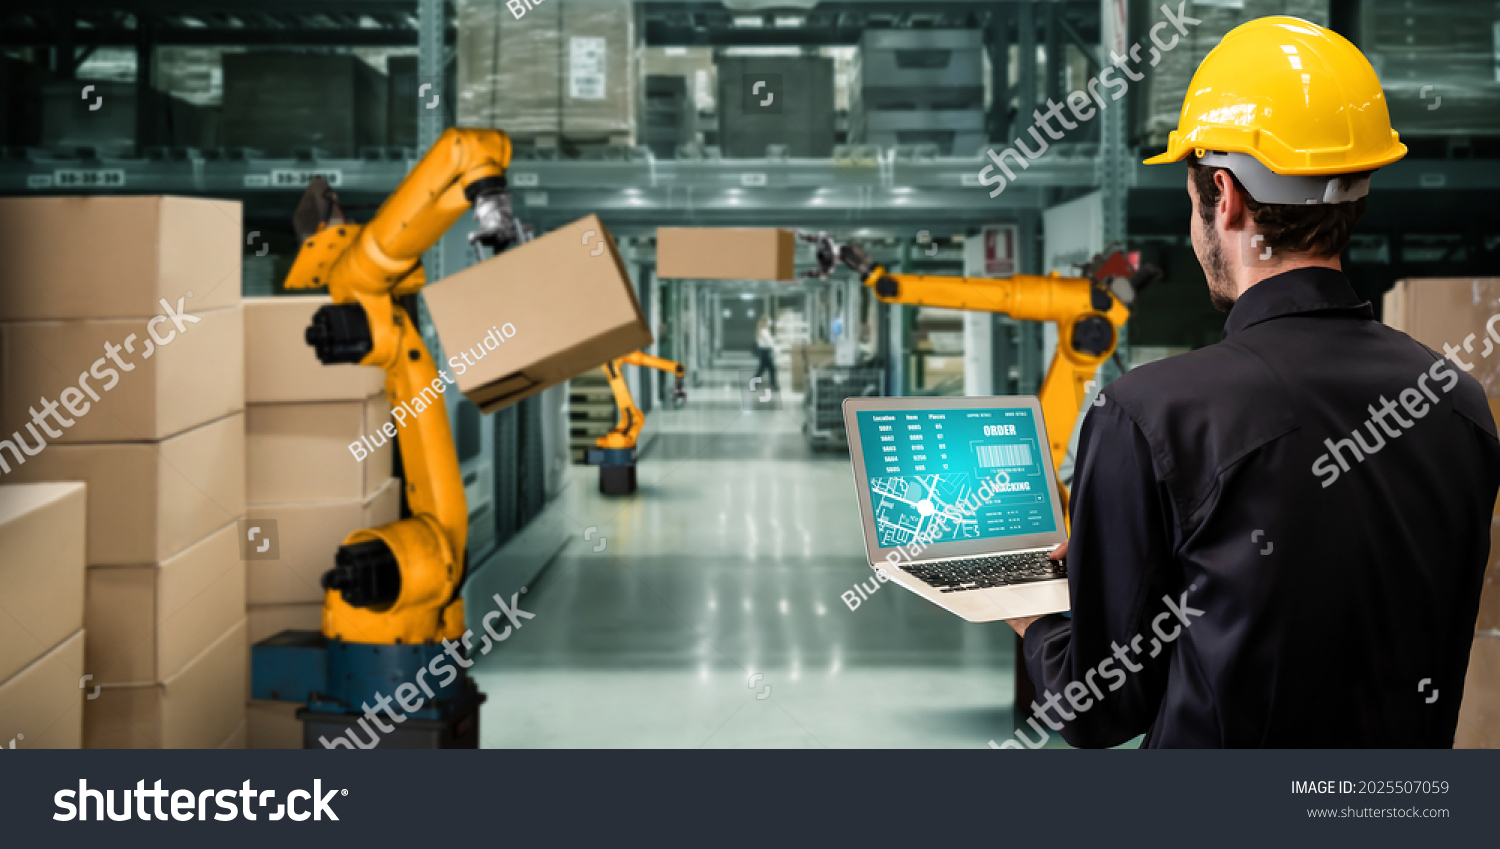 Smart robot arm systems for innovative warehouse and factory digital technology . Automation manufacturing robot controlled by industry engineering using IOT software connected to internet network . #2025507059